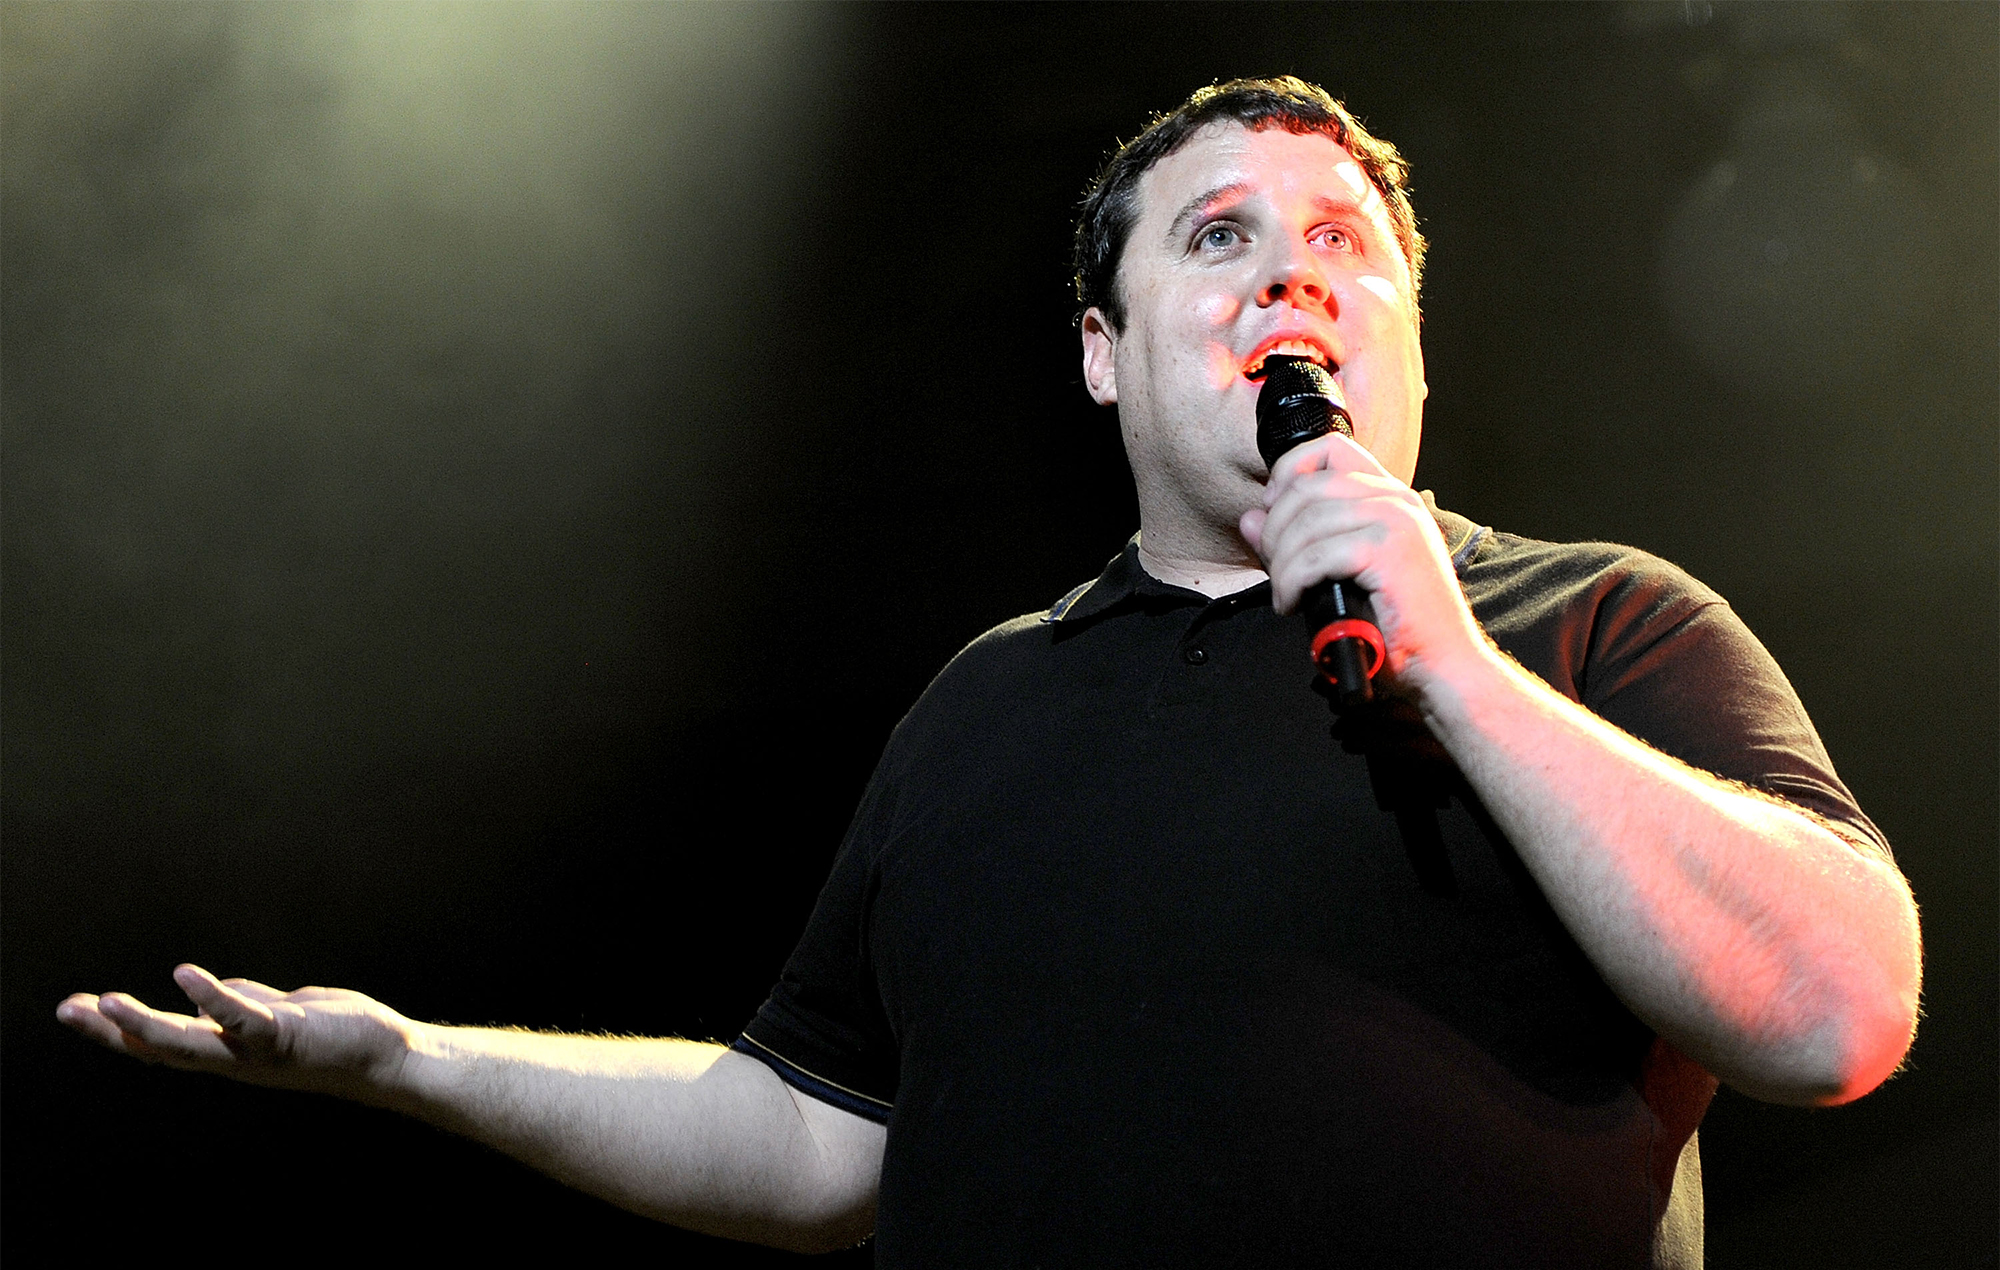 Peter Kay.  Image Credits: Shirlaine Forrest via WireImage